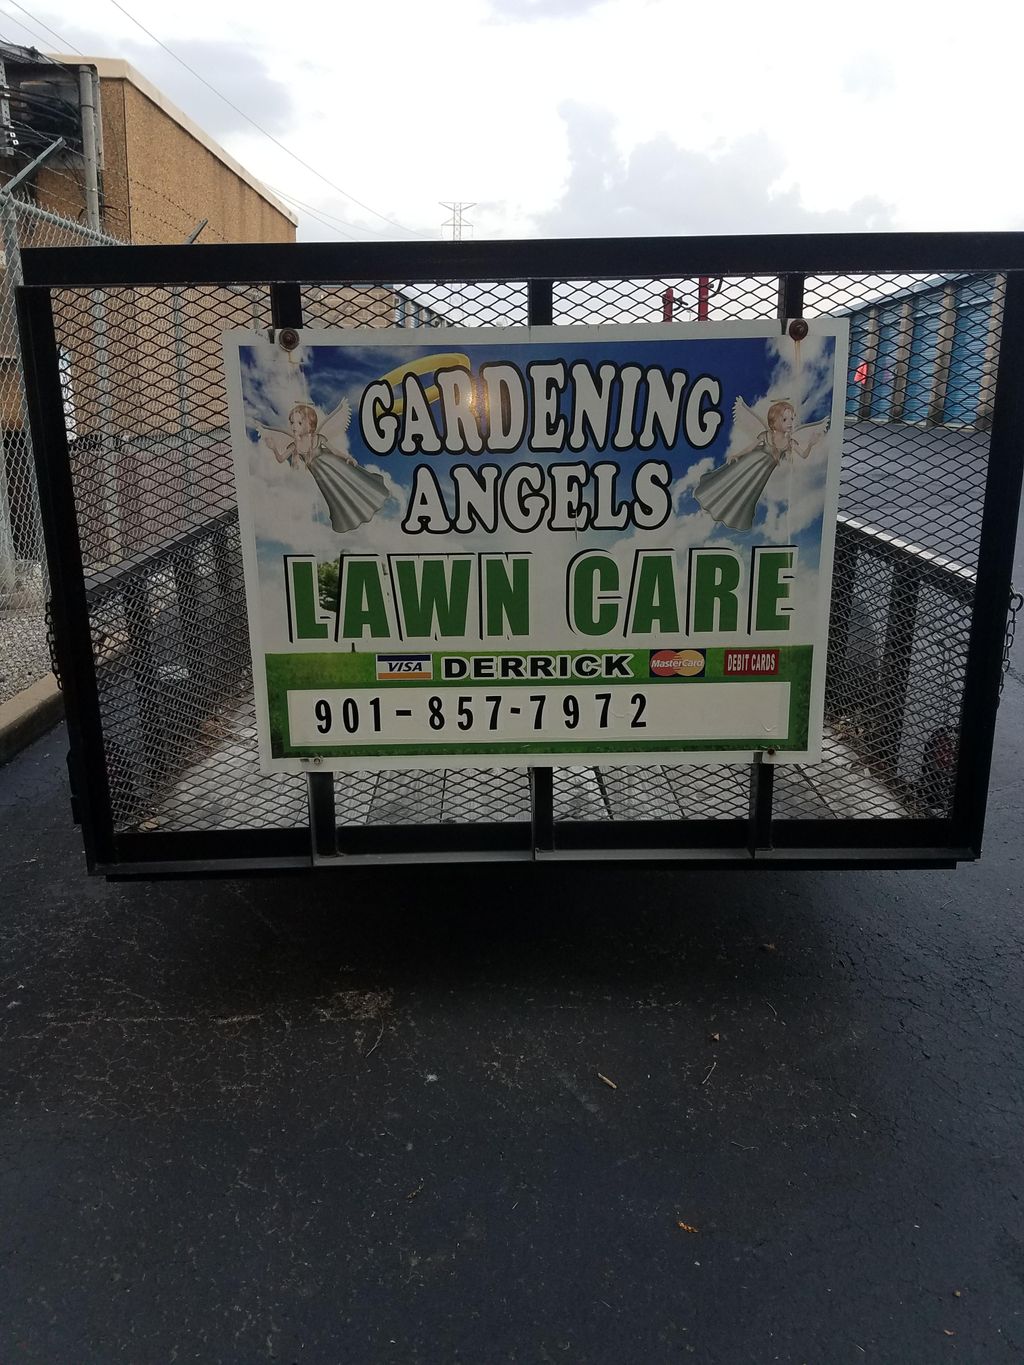 GARDENING ANGELS LAWN CARE